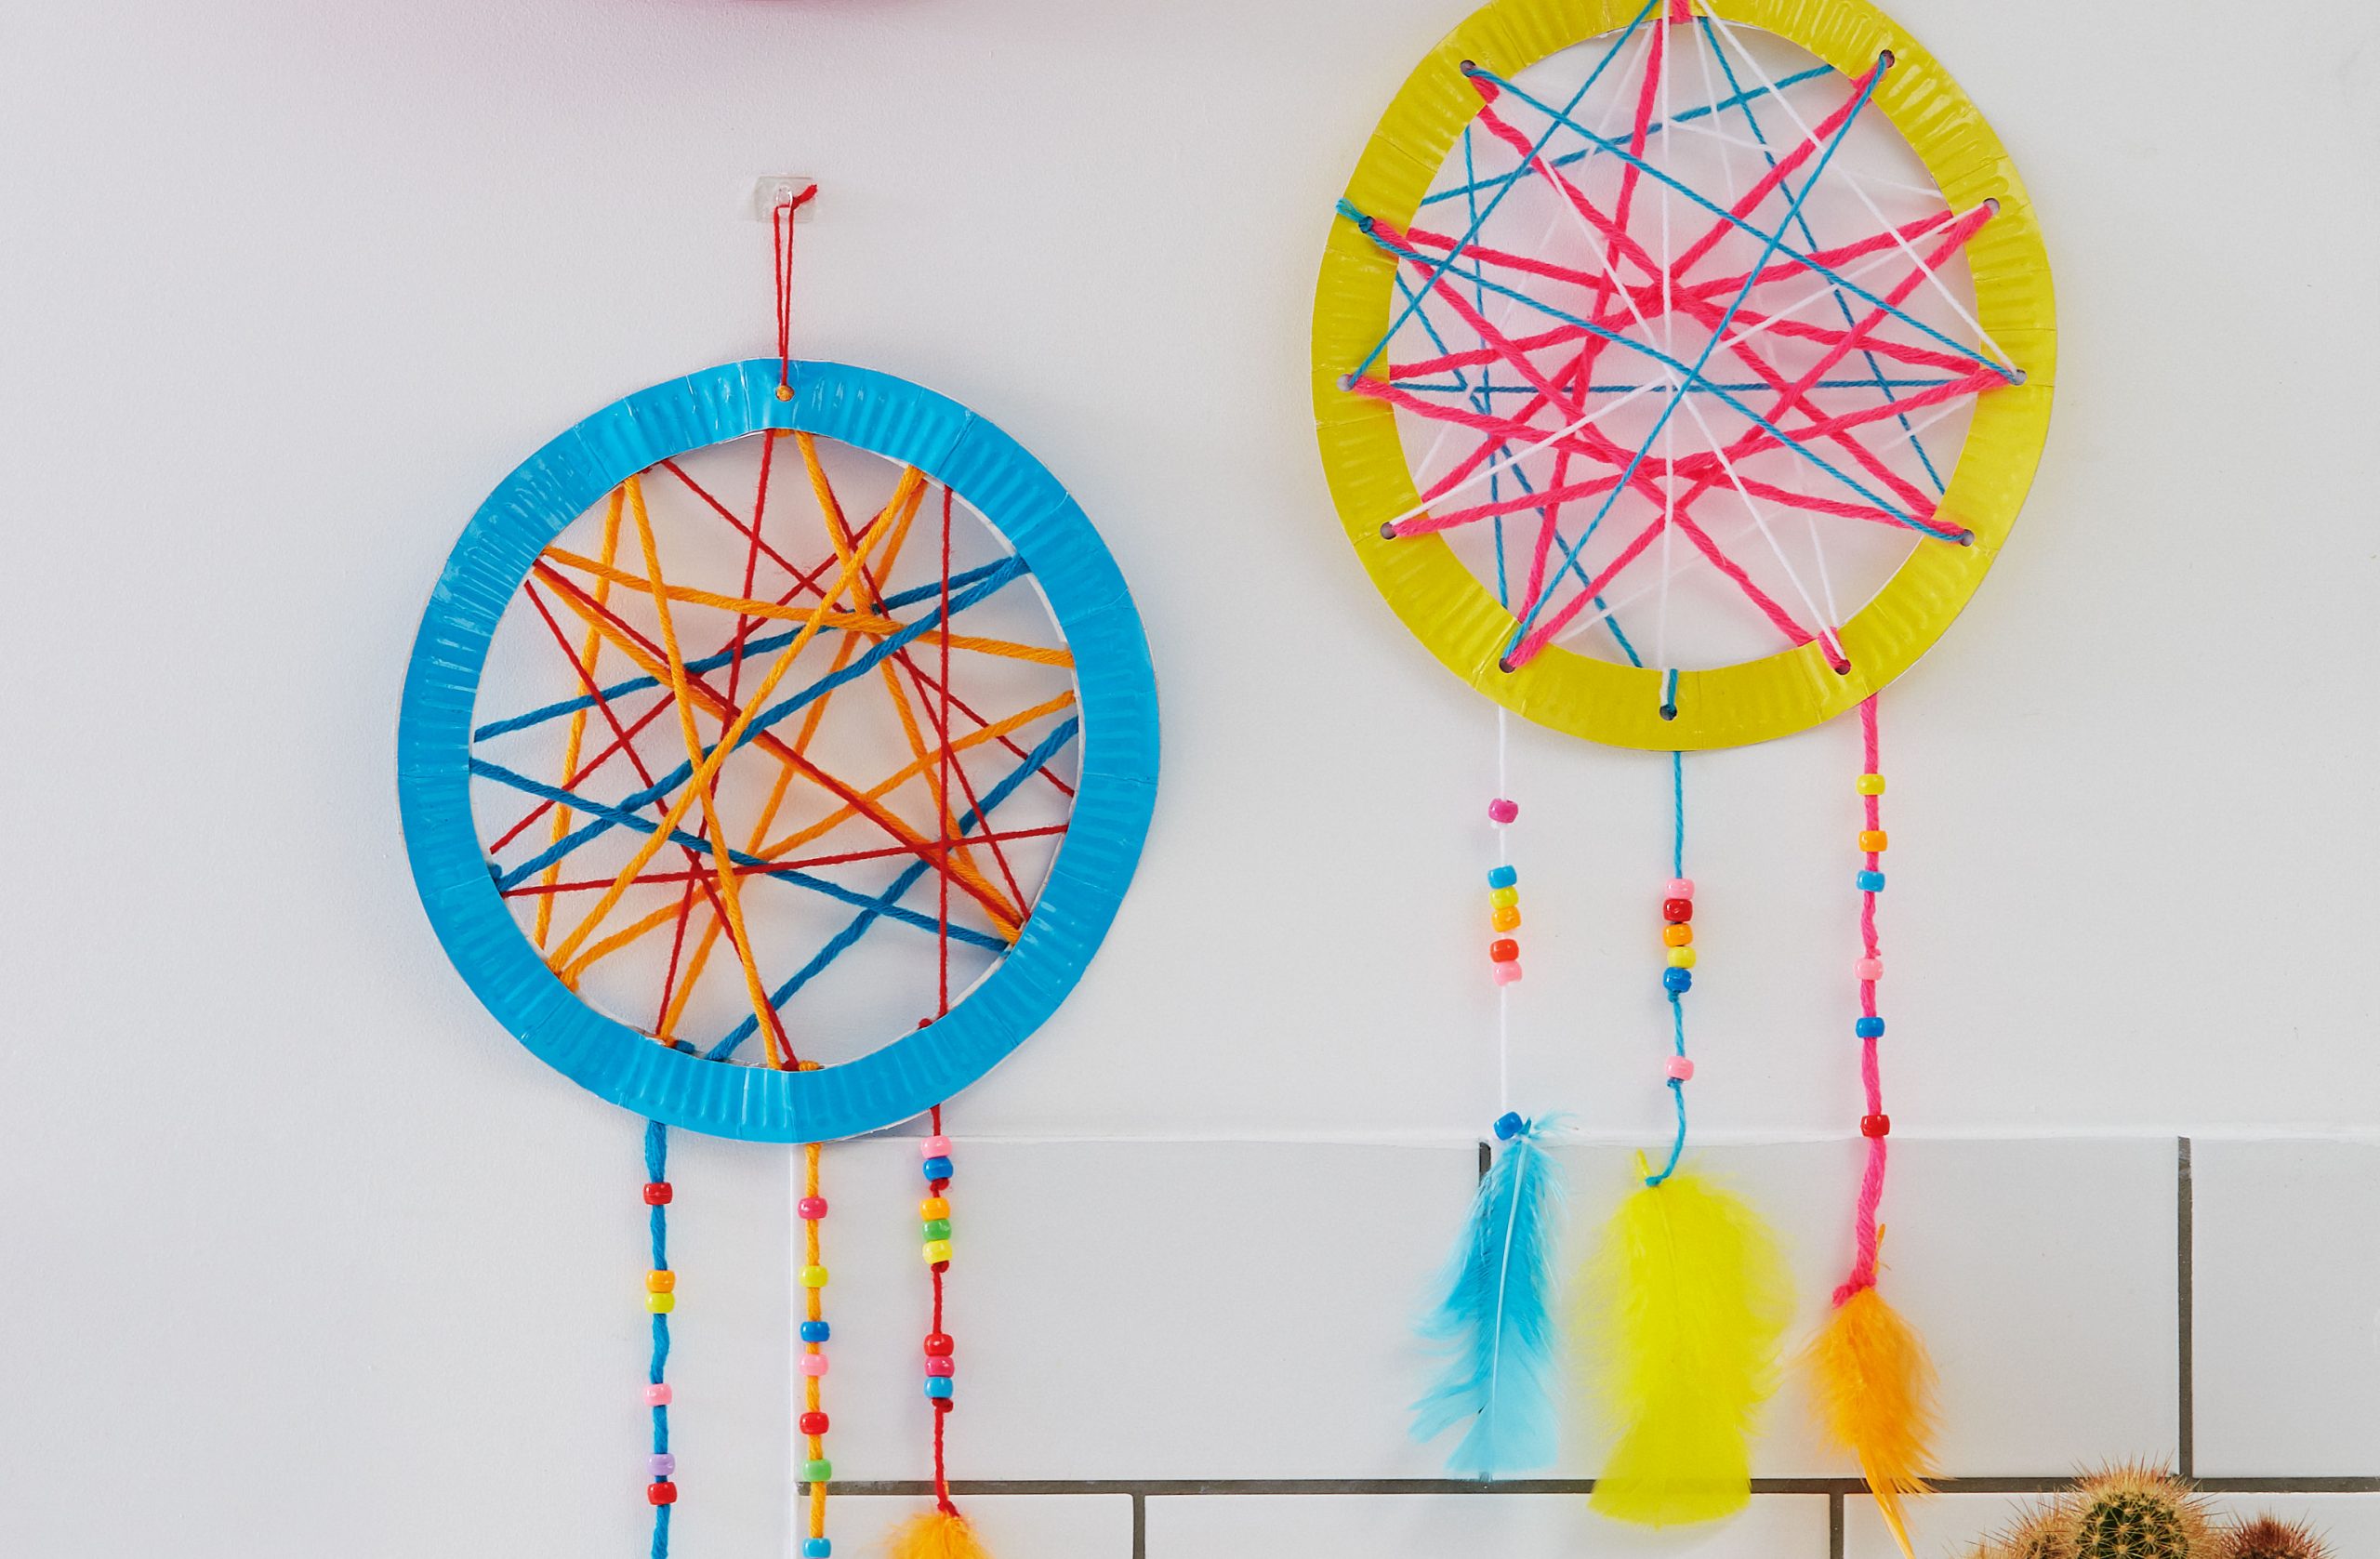 Easy crafts for kids illustrated by DIY dreamcatchers